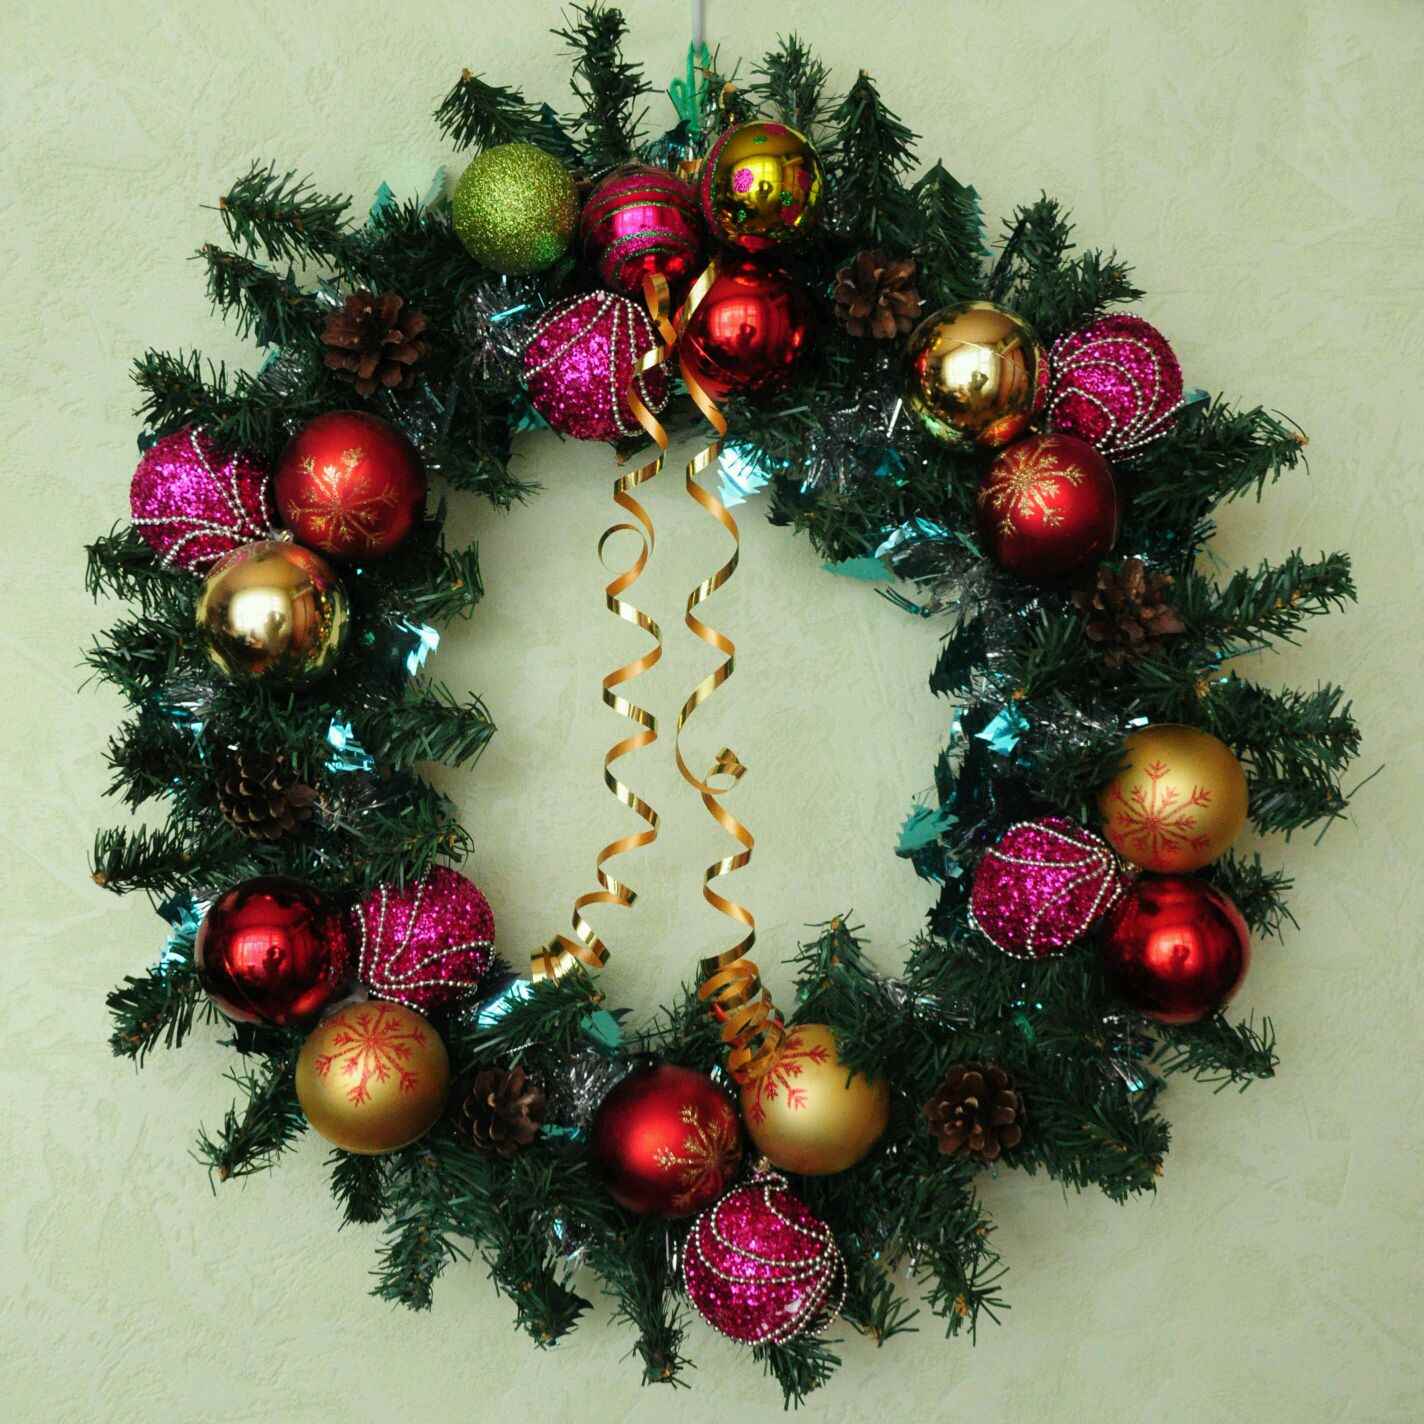 do-it-yourself version of the unusual design of a Christmas wreath